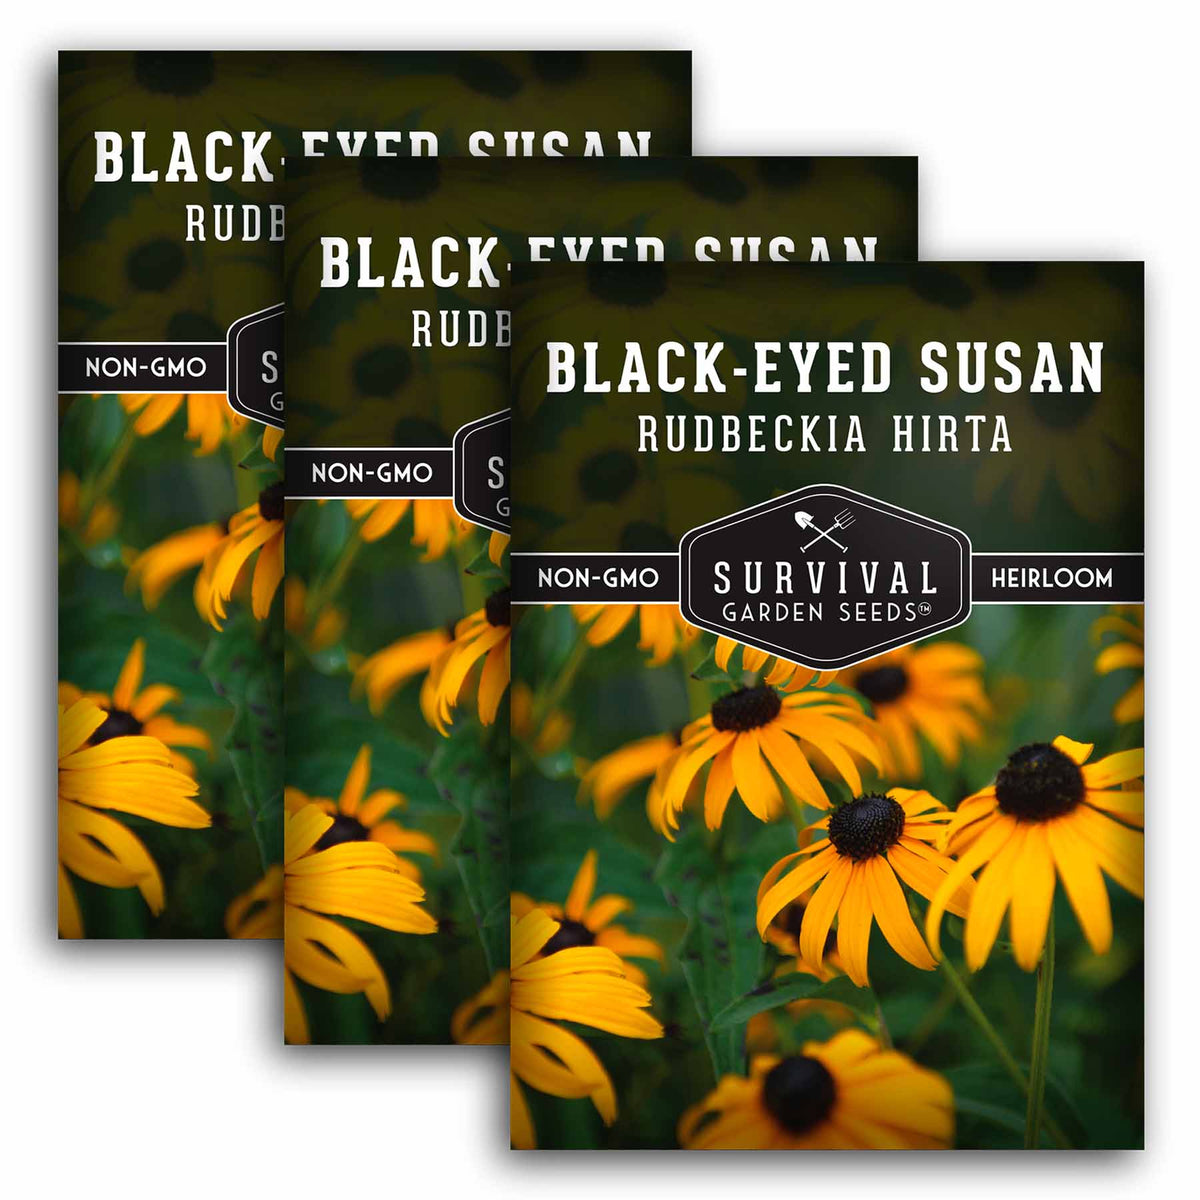 3 packets of Blackeyed Susan seeds